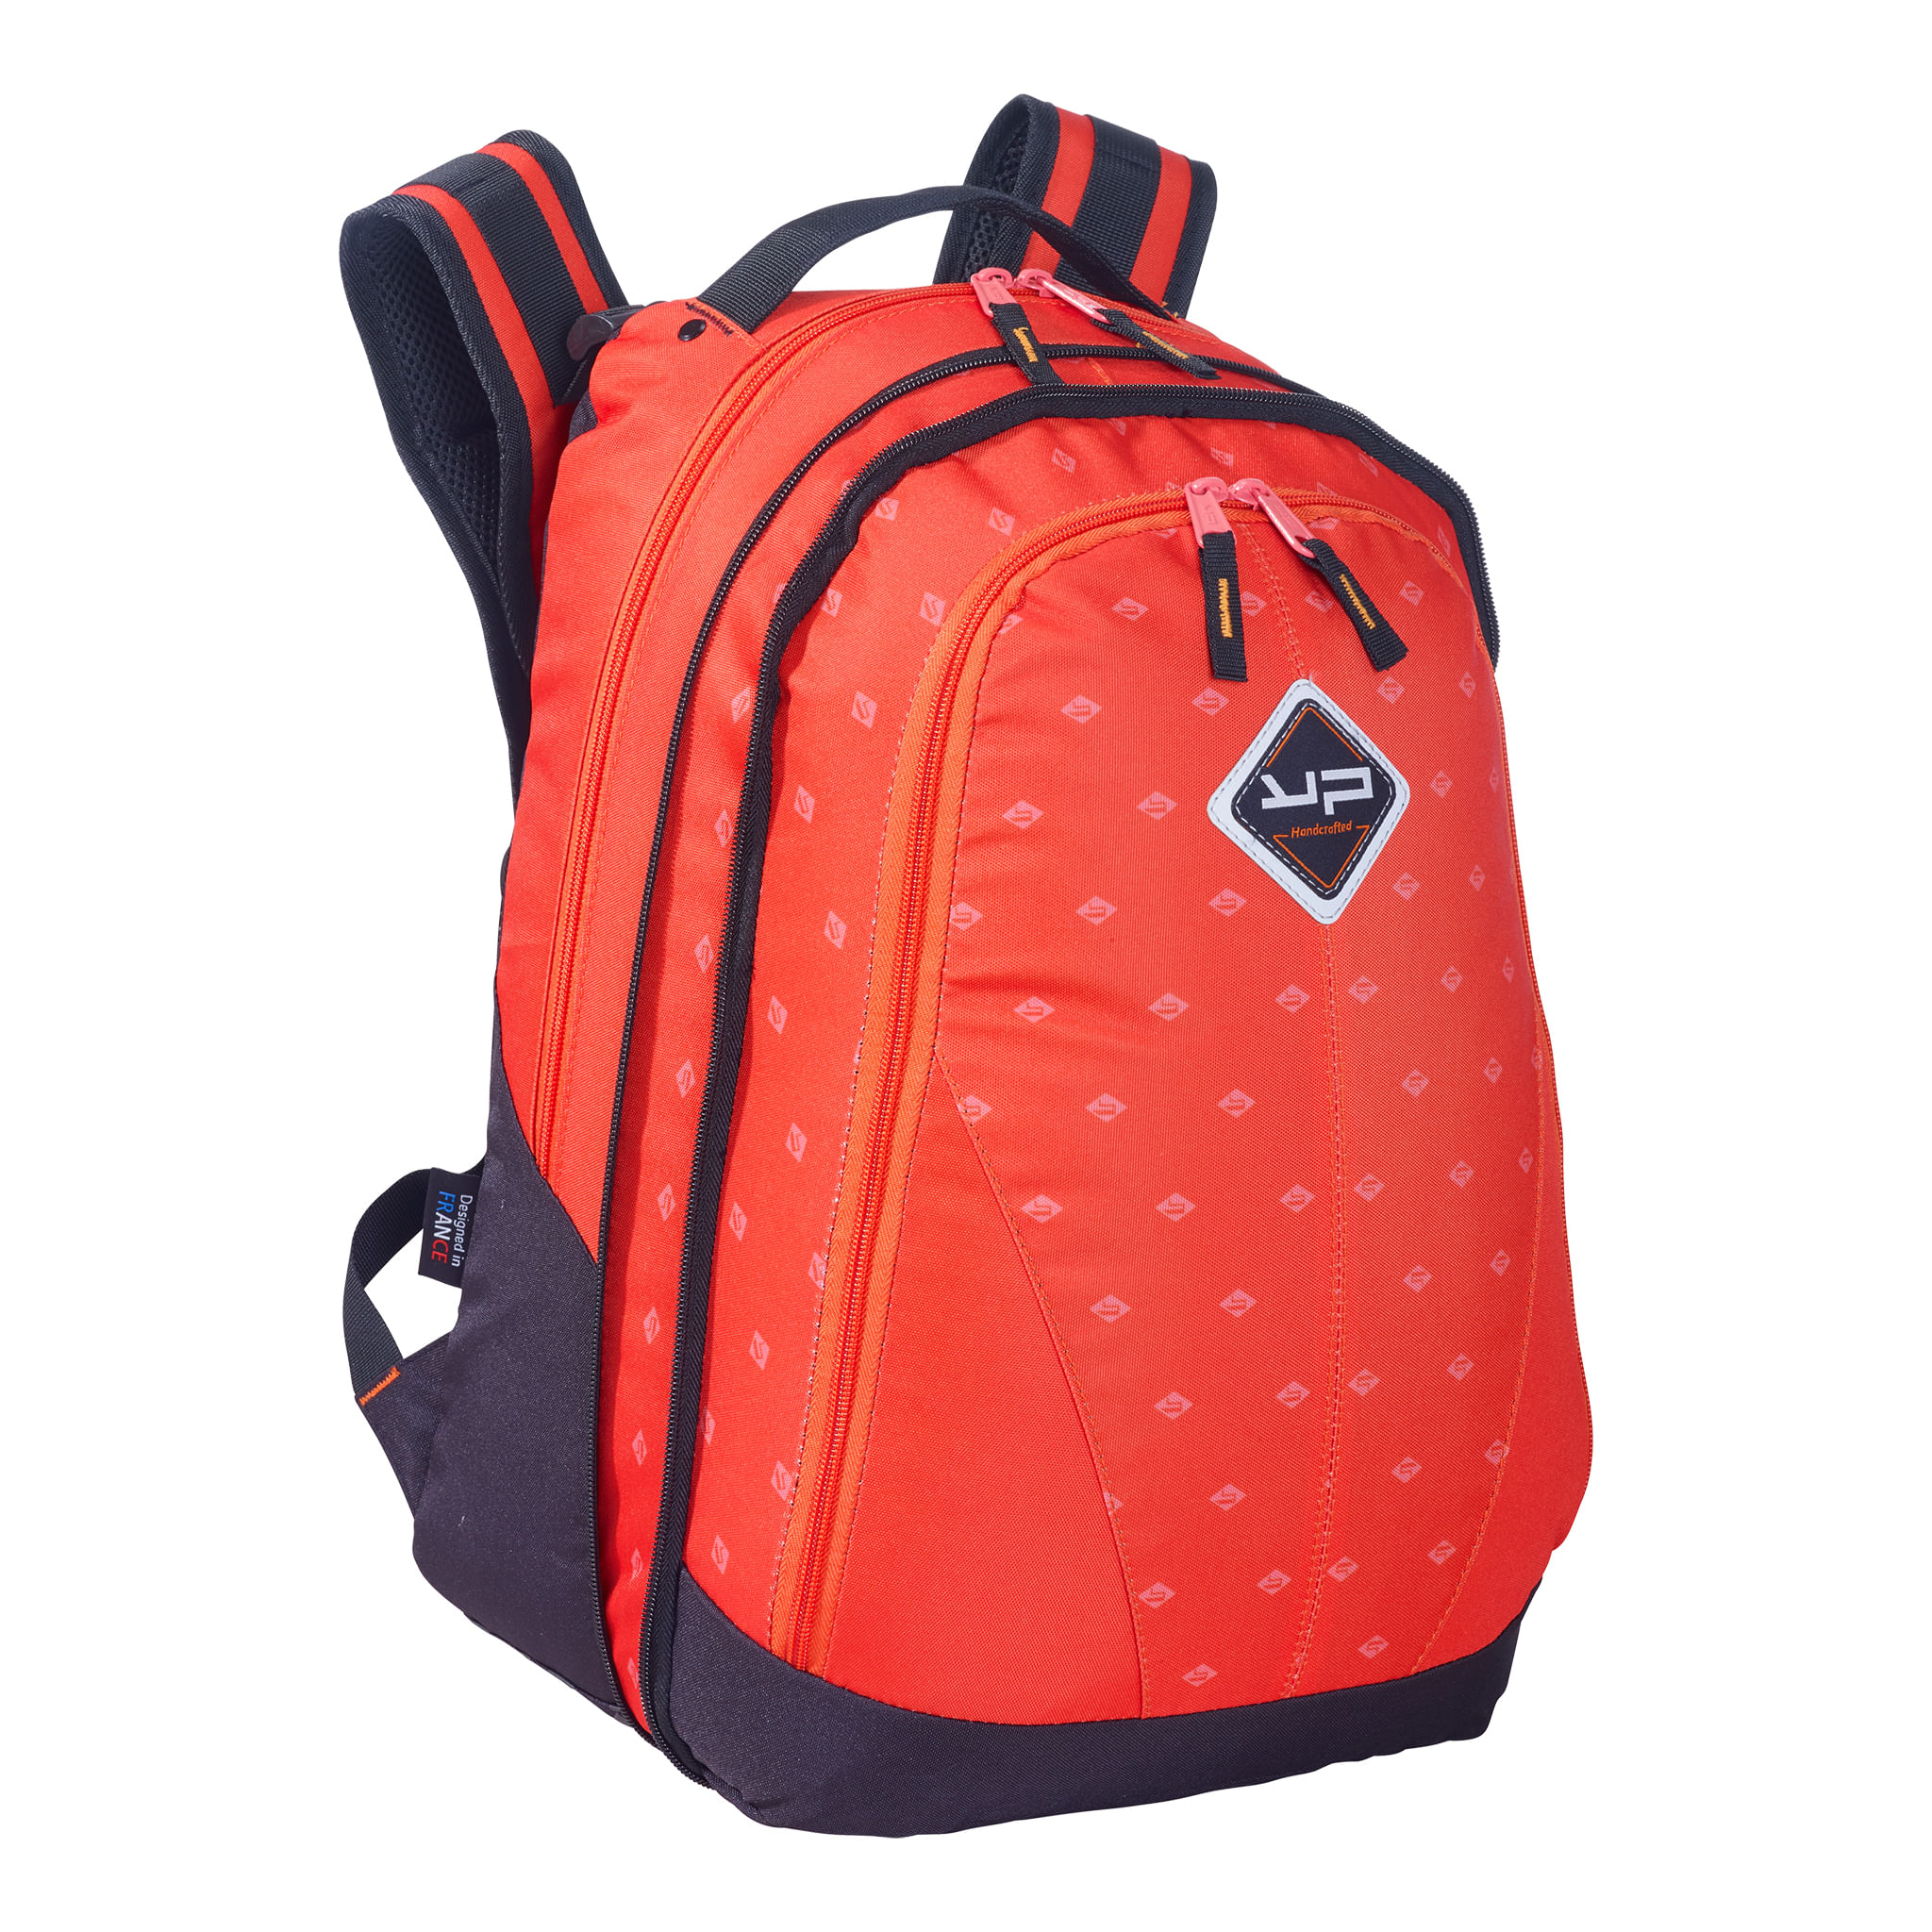 Rucsac Bodypack 2 compartimente extensibil Power Red